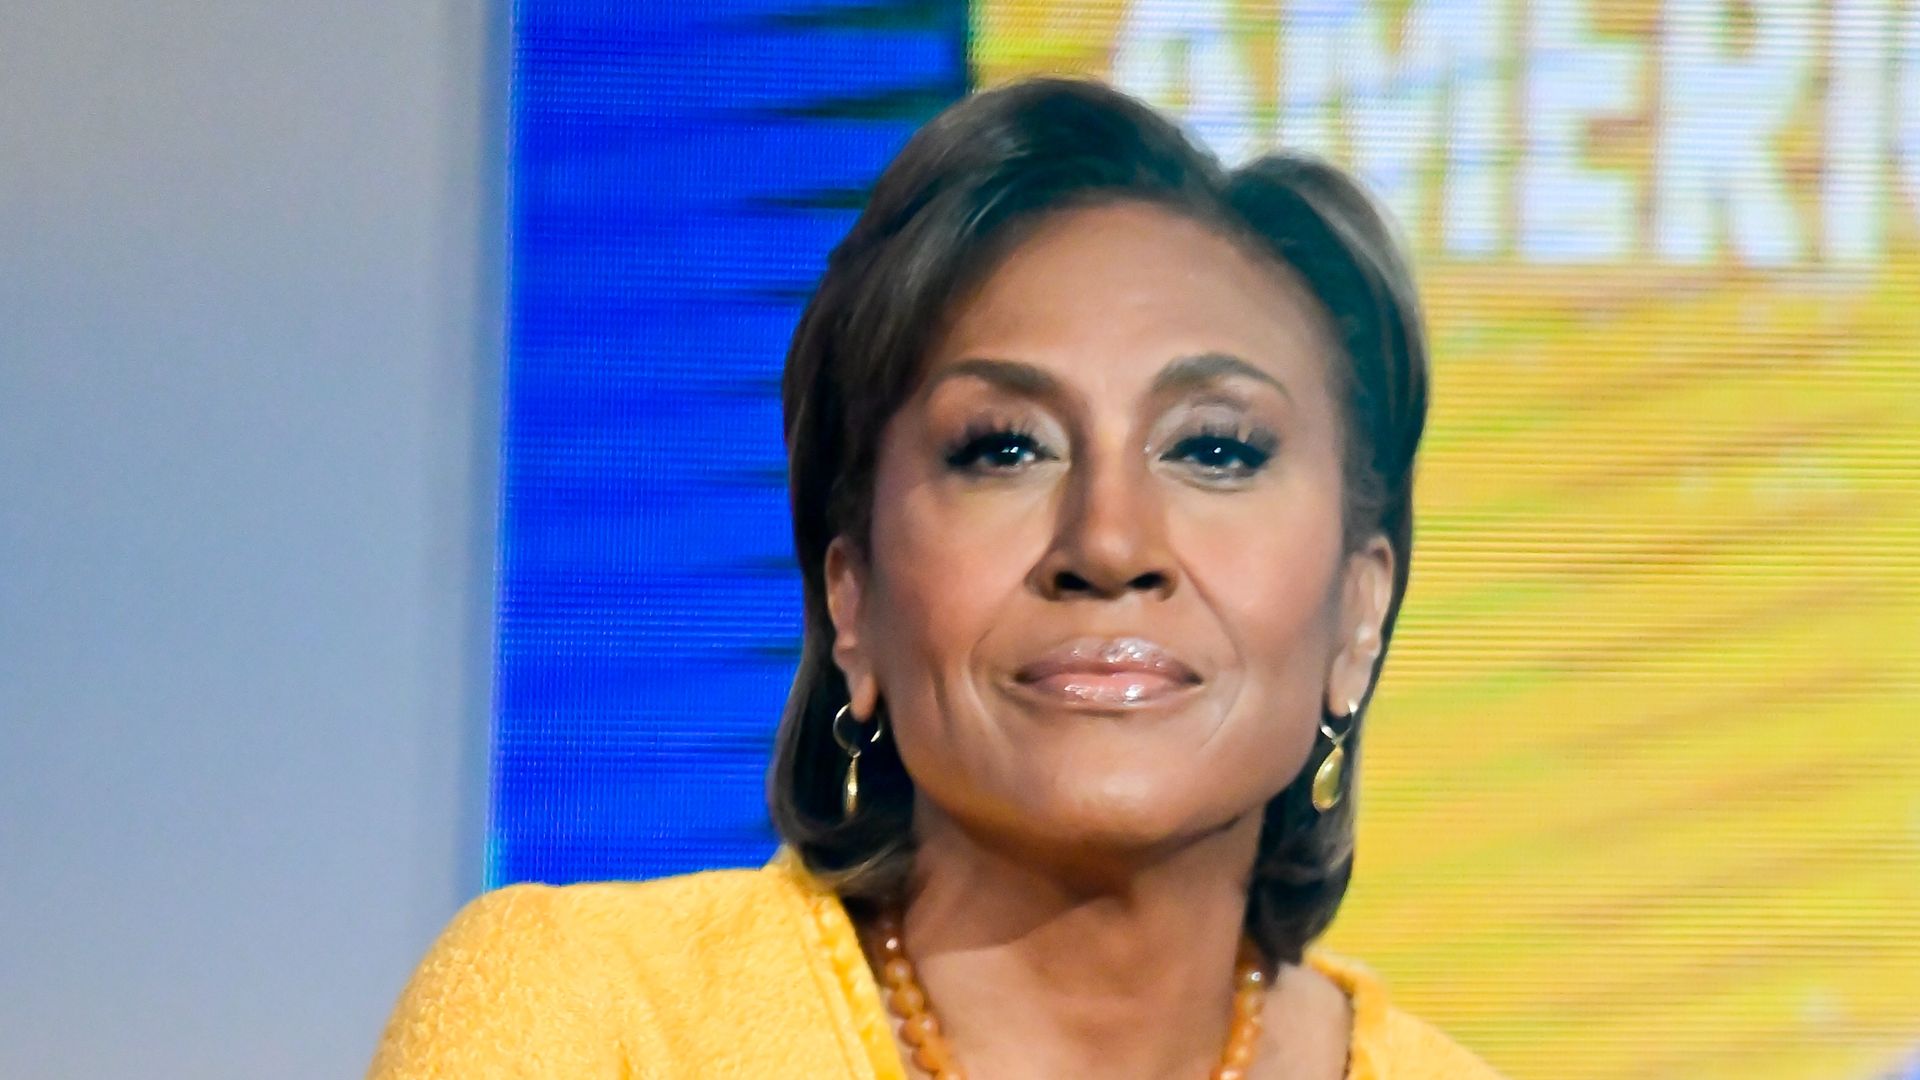 Robin Roberts is seen on set of "Good Morning America" on March 25, 2021